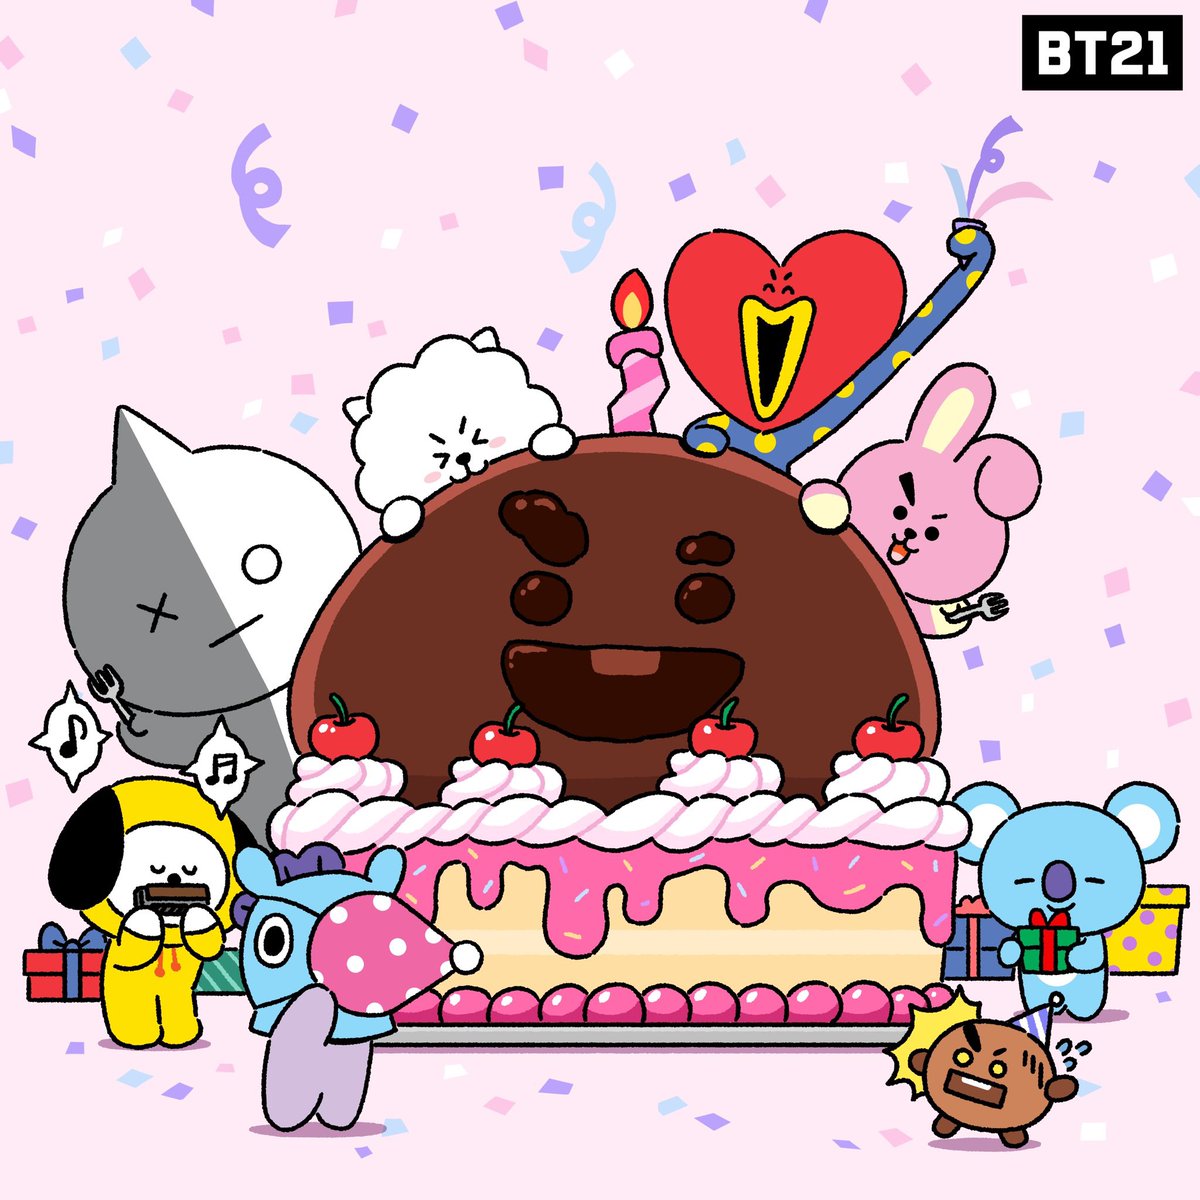 Wait, It's all cake? 
RJ : Big Bite(?!) 😳
UNISTARS do you want to have a bite too?
Today is SHOOKY's sweetest day 💕🎂🍪

#BT21 #SHOOKY #cake #mukbang